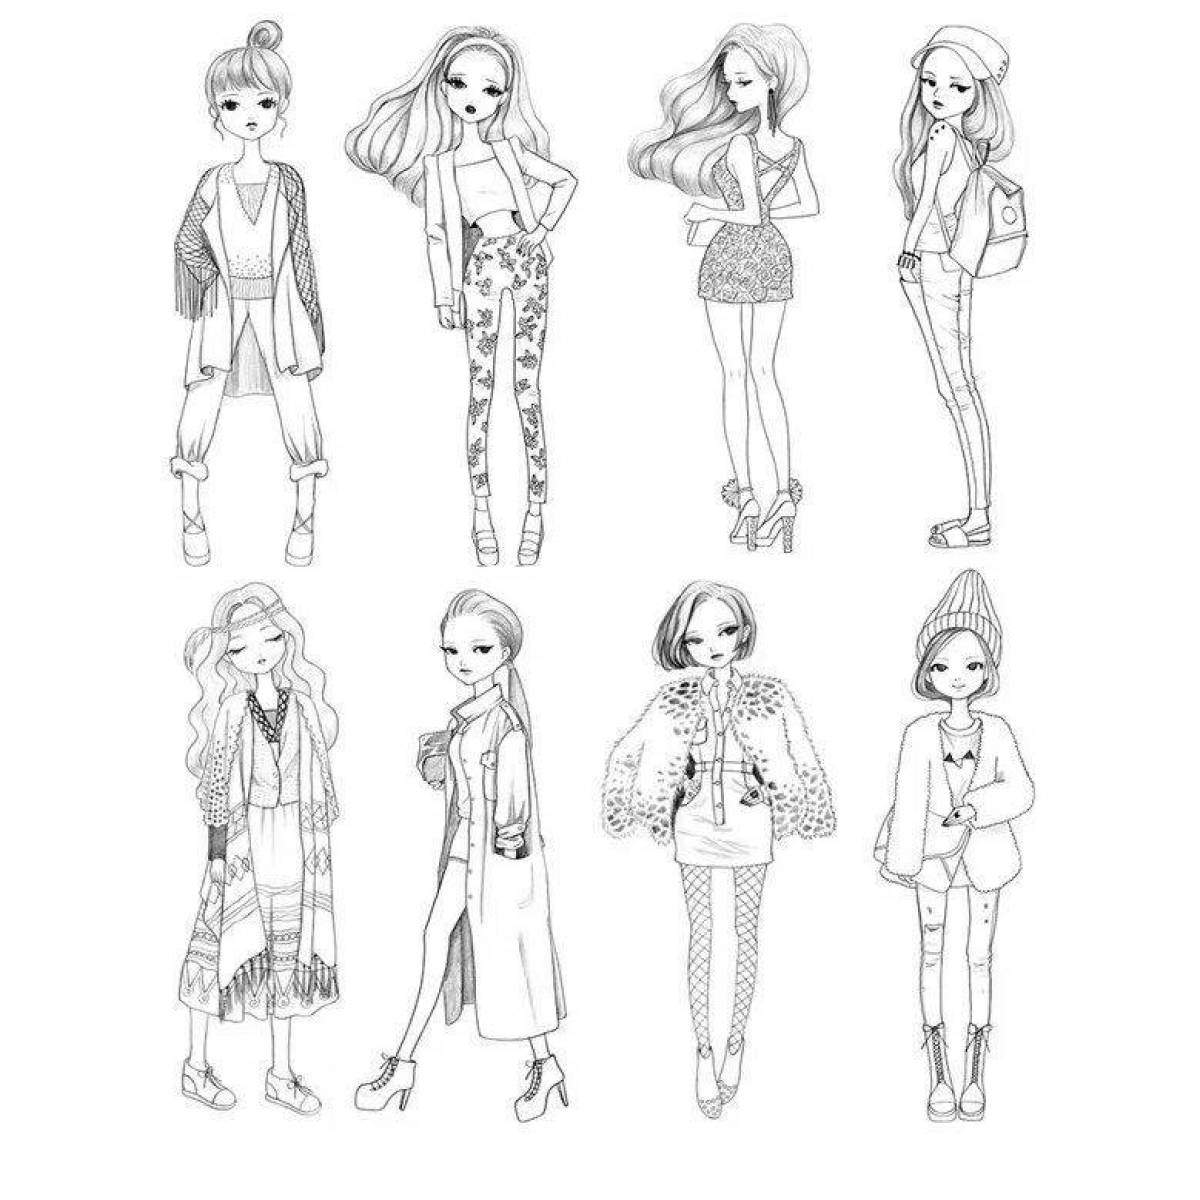 Coloring page with spectacular clothes